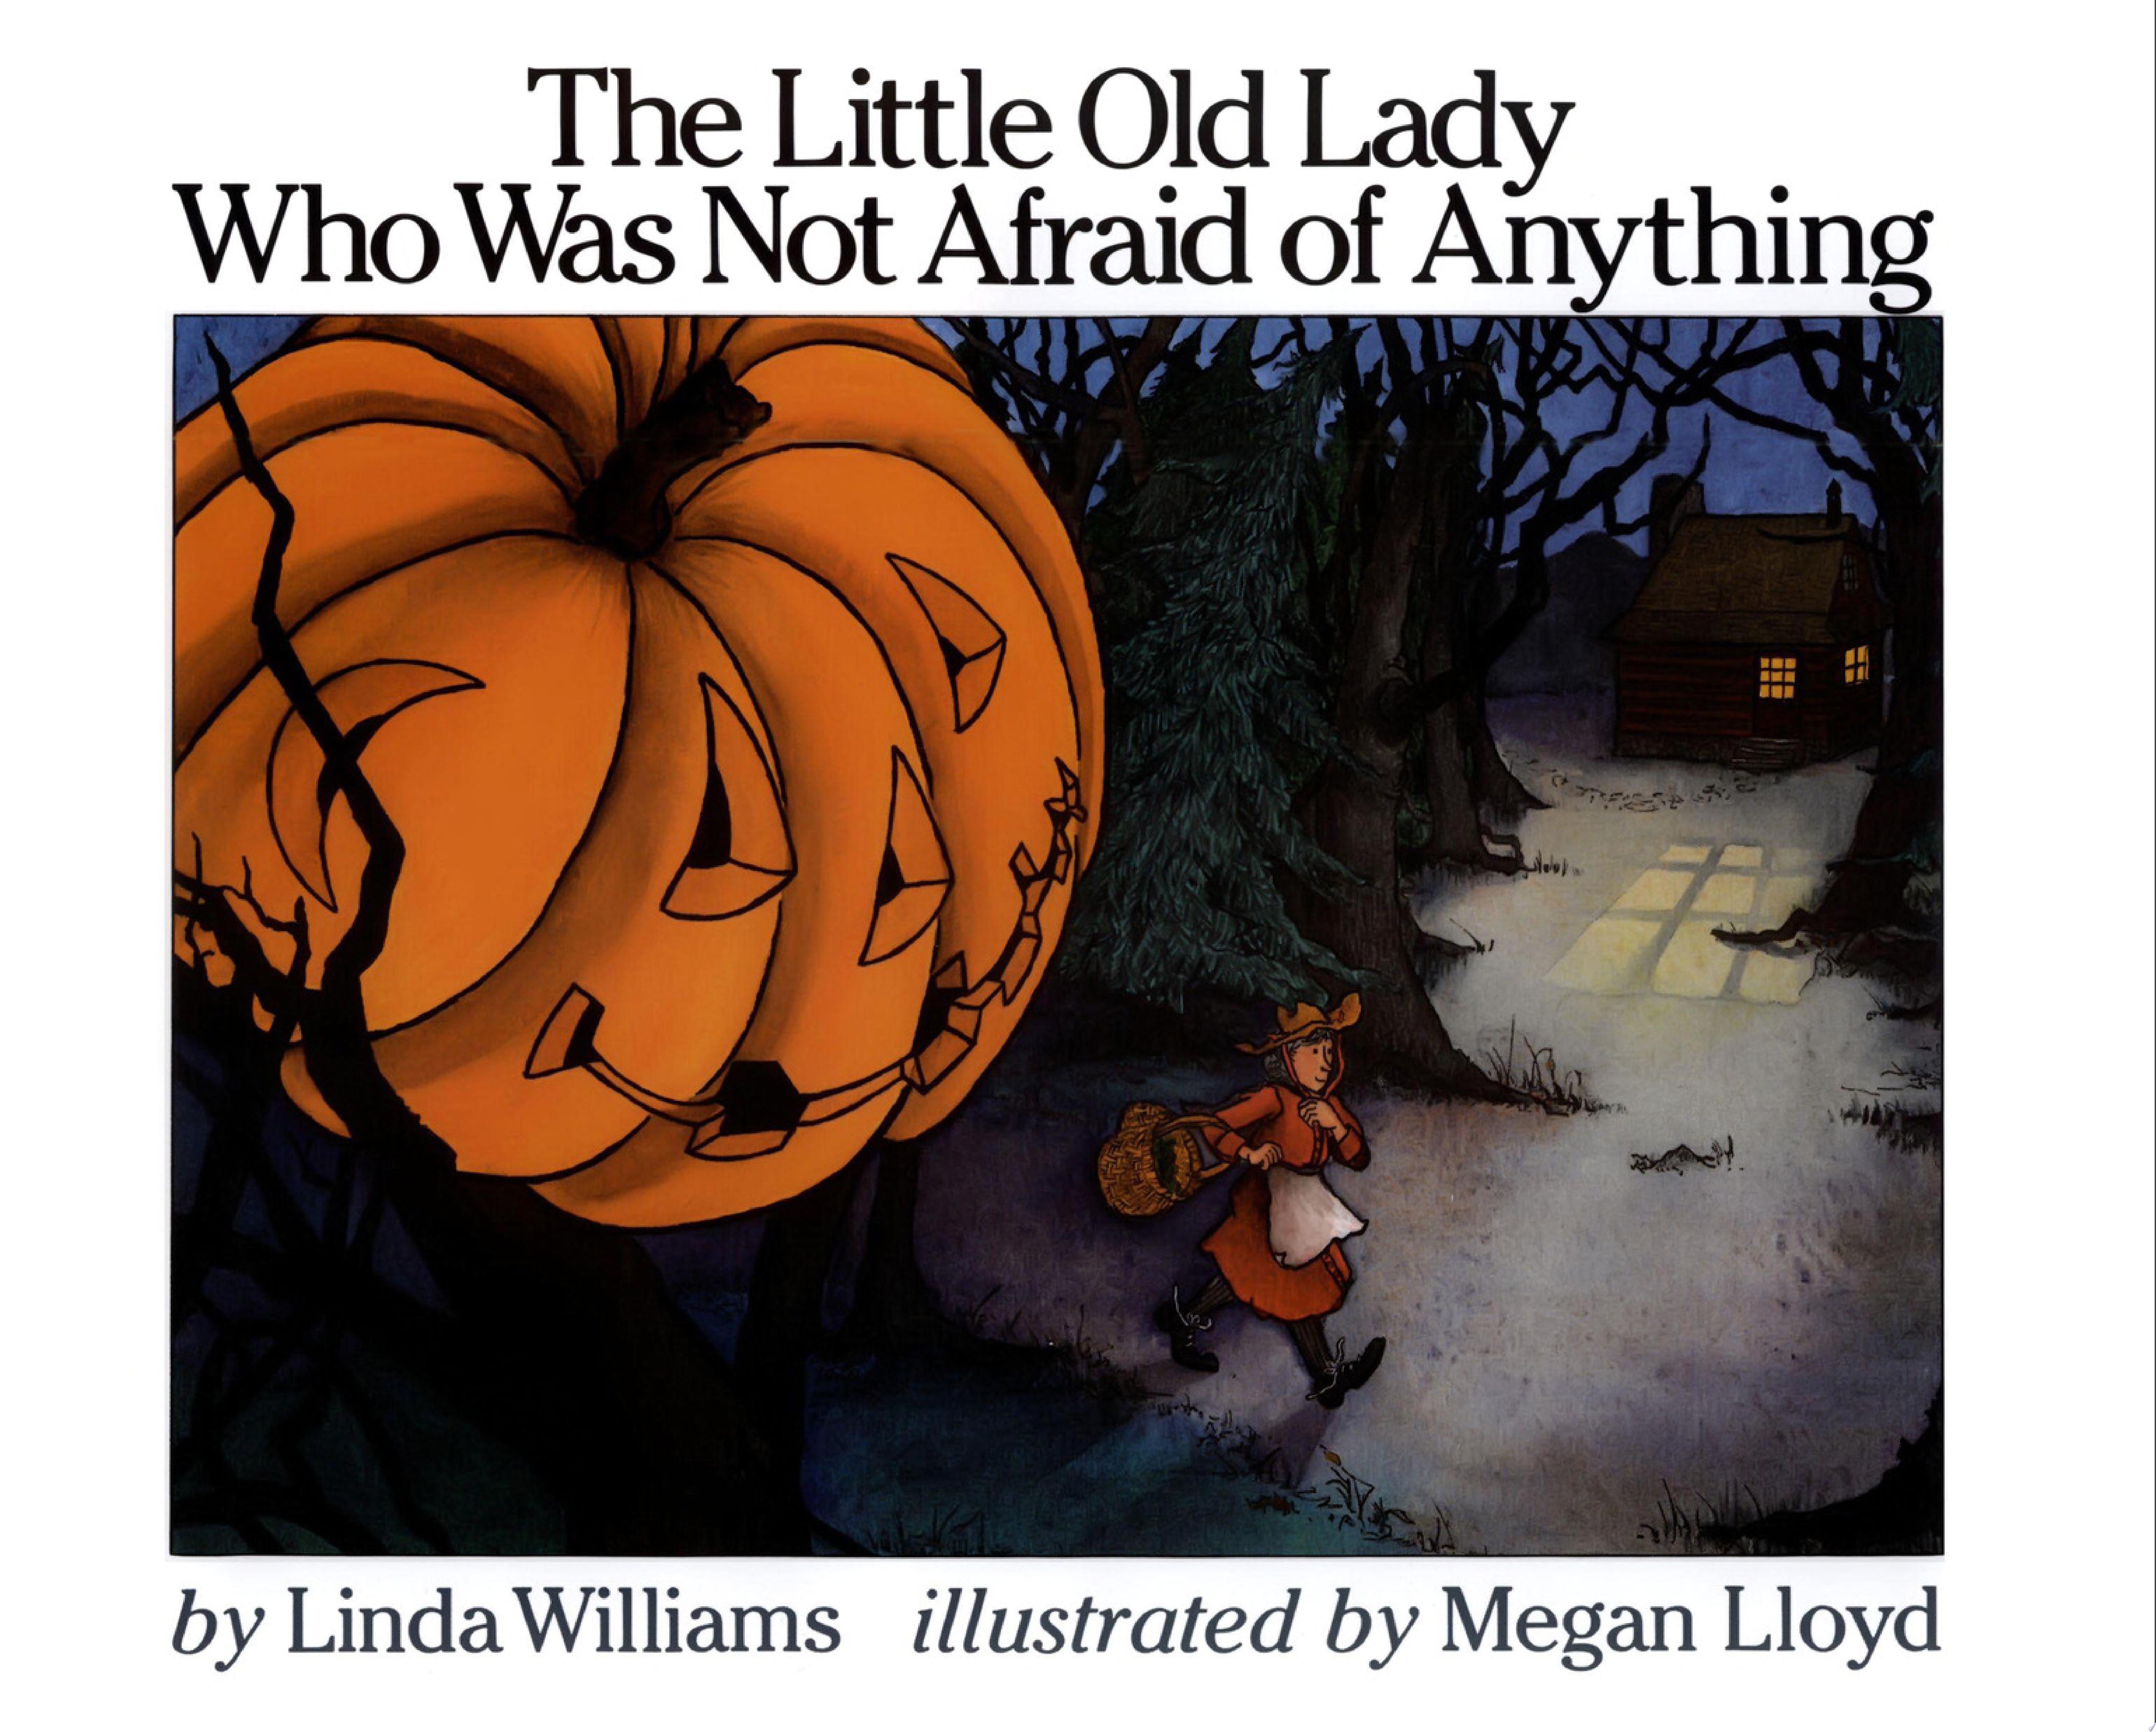 Image for "The Little Old Lady Who Was Not Afraid of Anything"